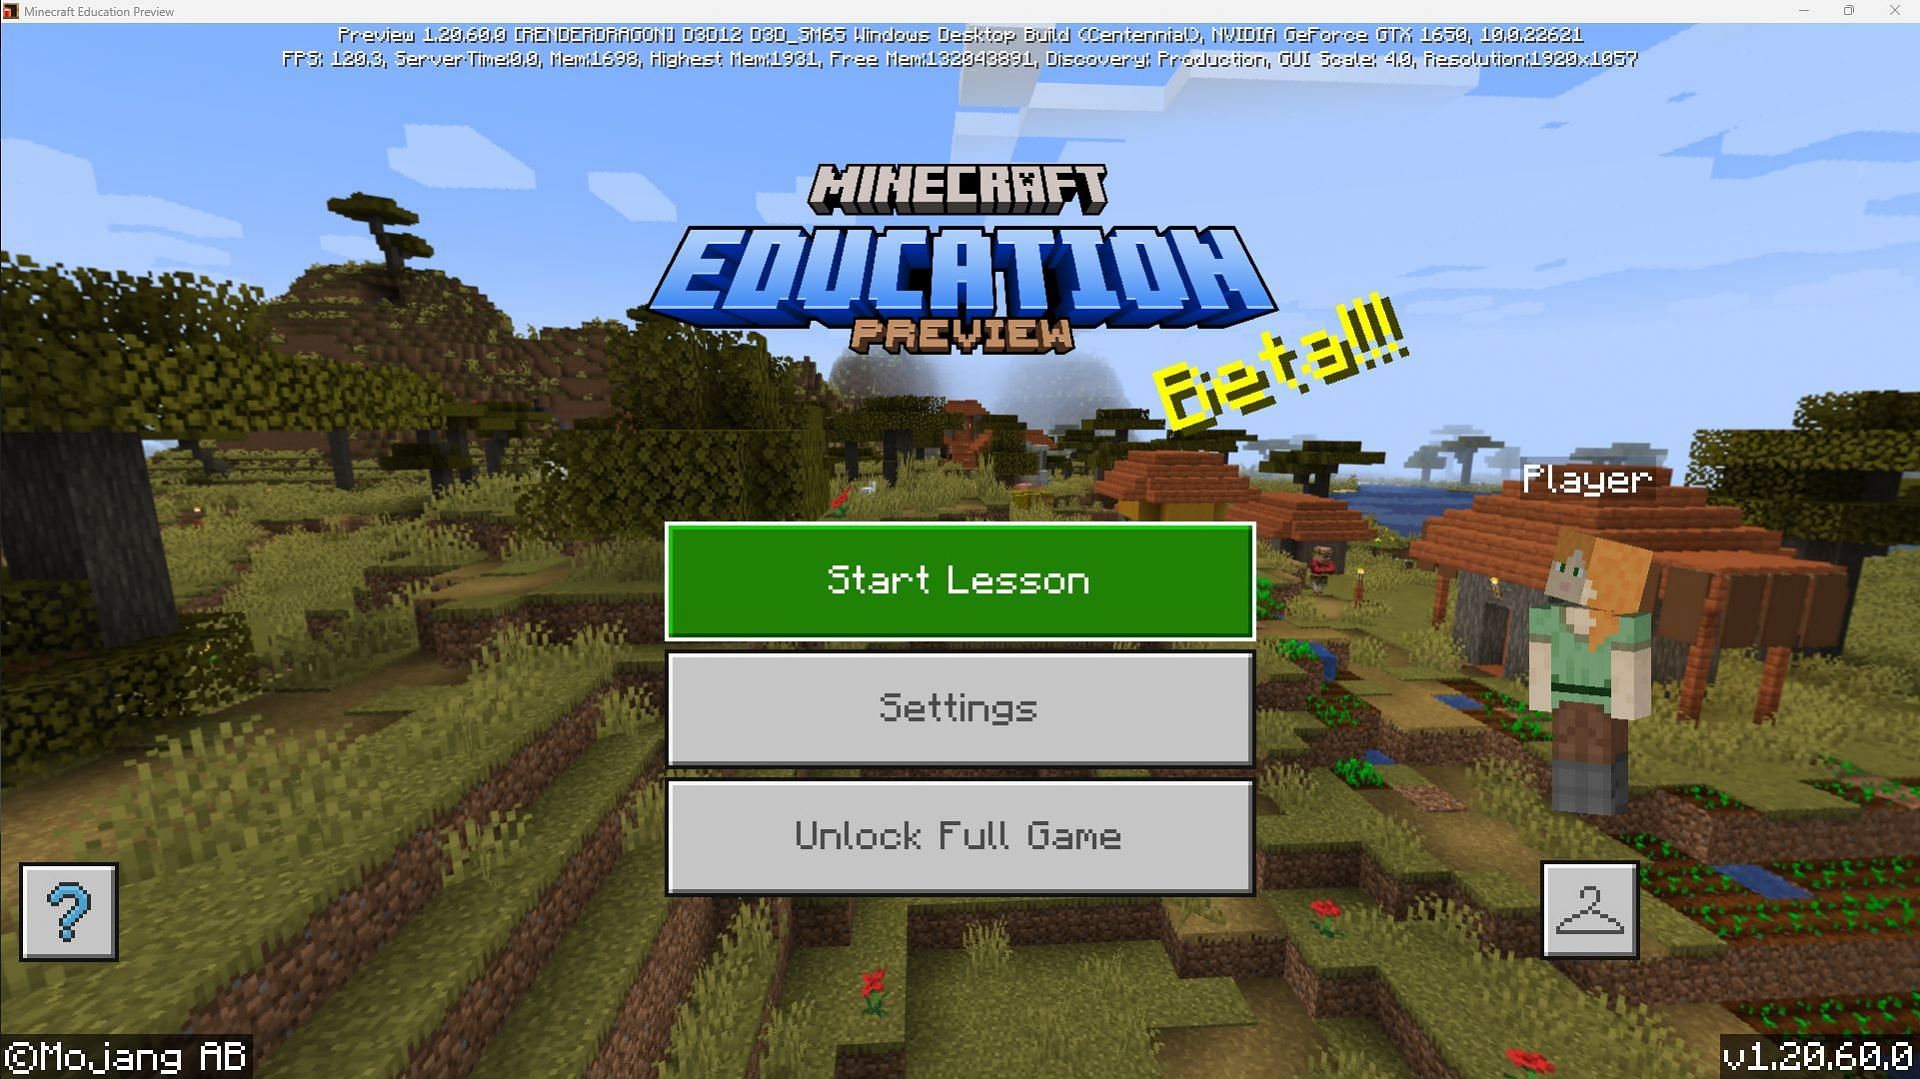 Minecraft Education Preview needs a school or work Microsoft account with an official Education Edition license to run the full game (Image via Mojang)